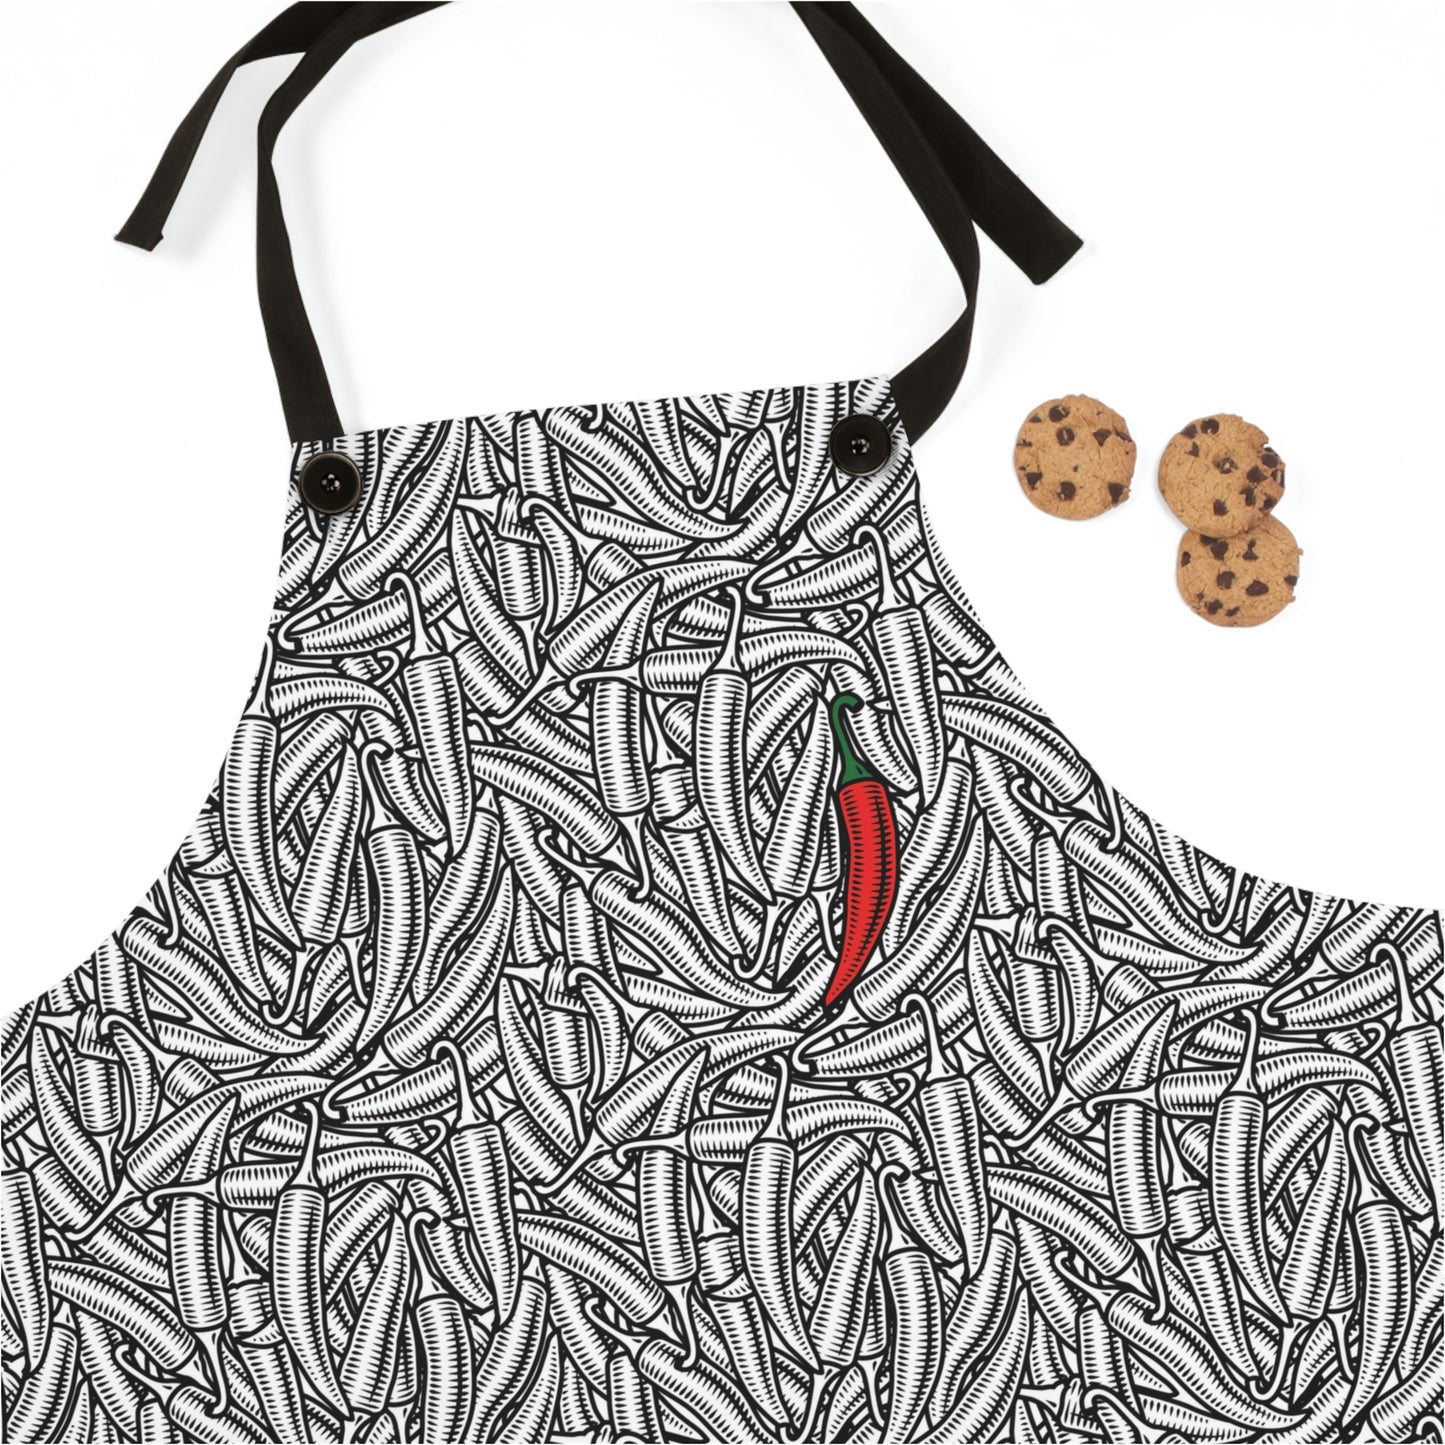 Add a little heat in the kitchen - Apron